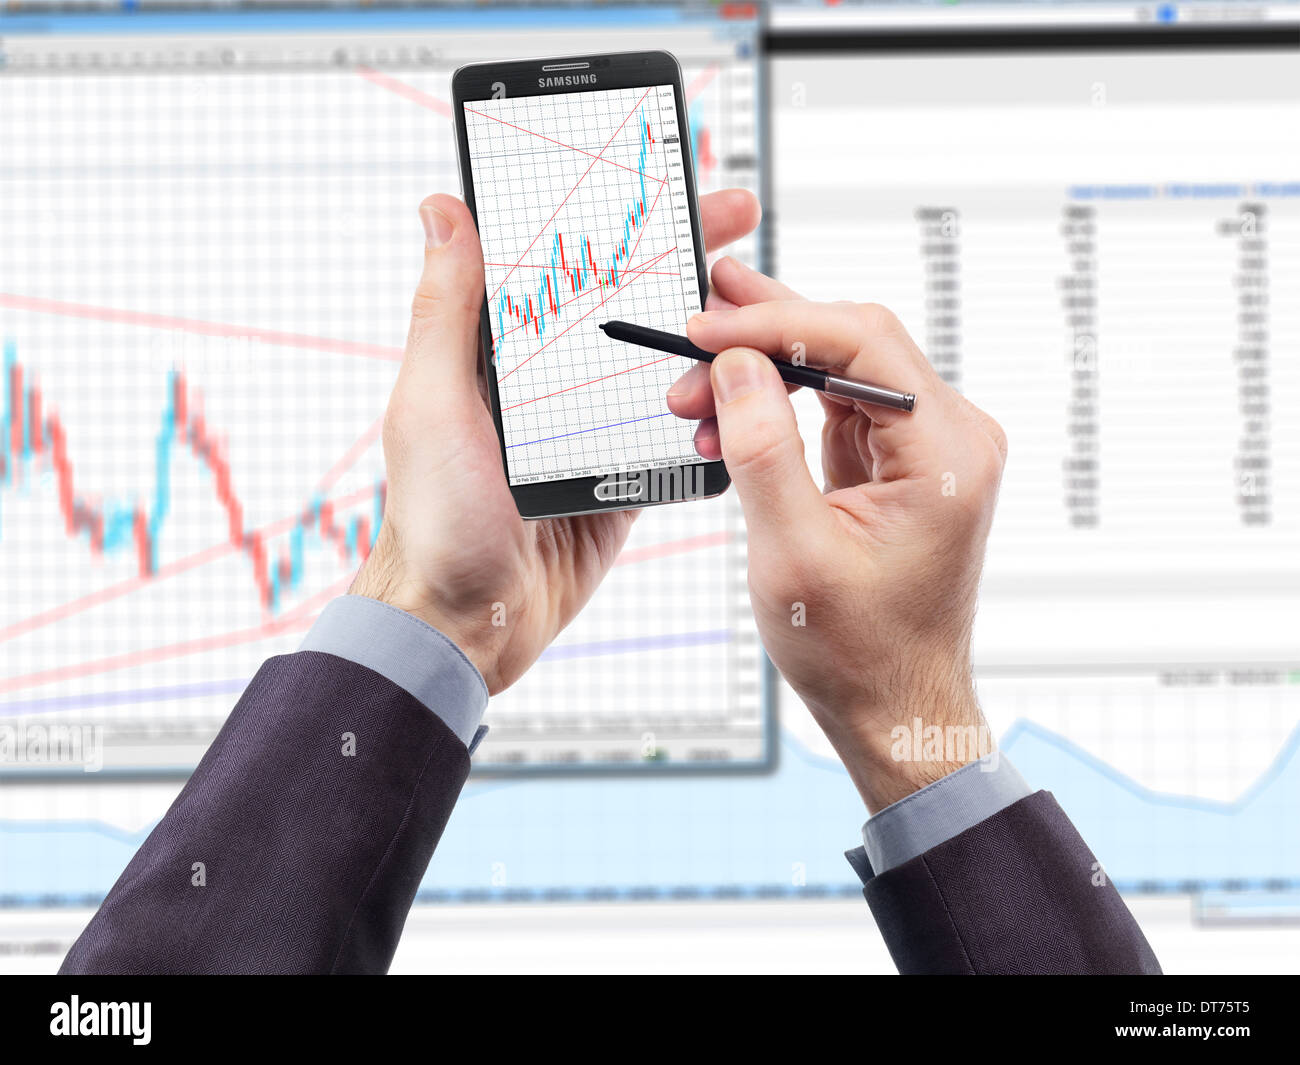 Businessman with smartphone displaying currency exchange charts and a monitor in the background Stock Photo